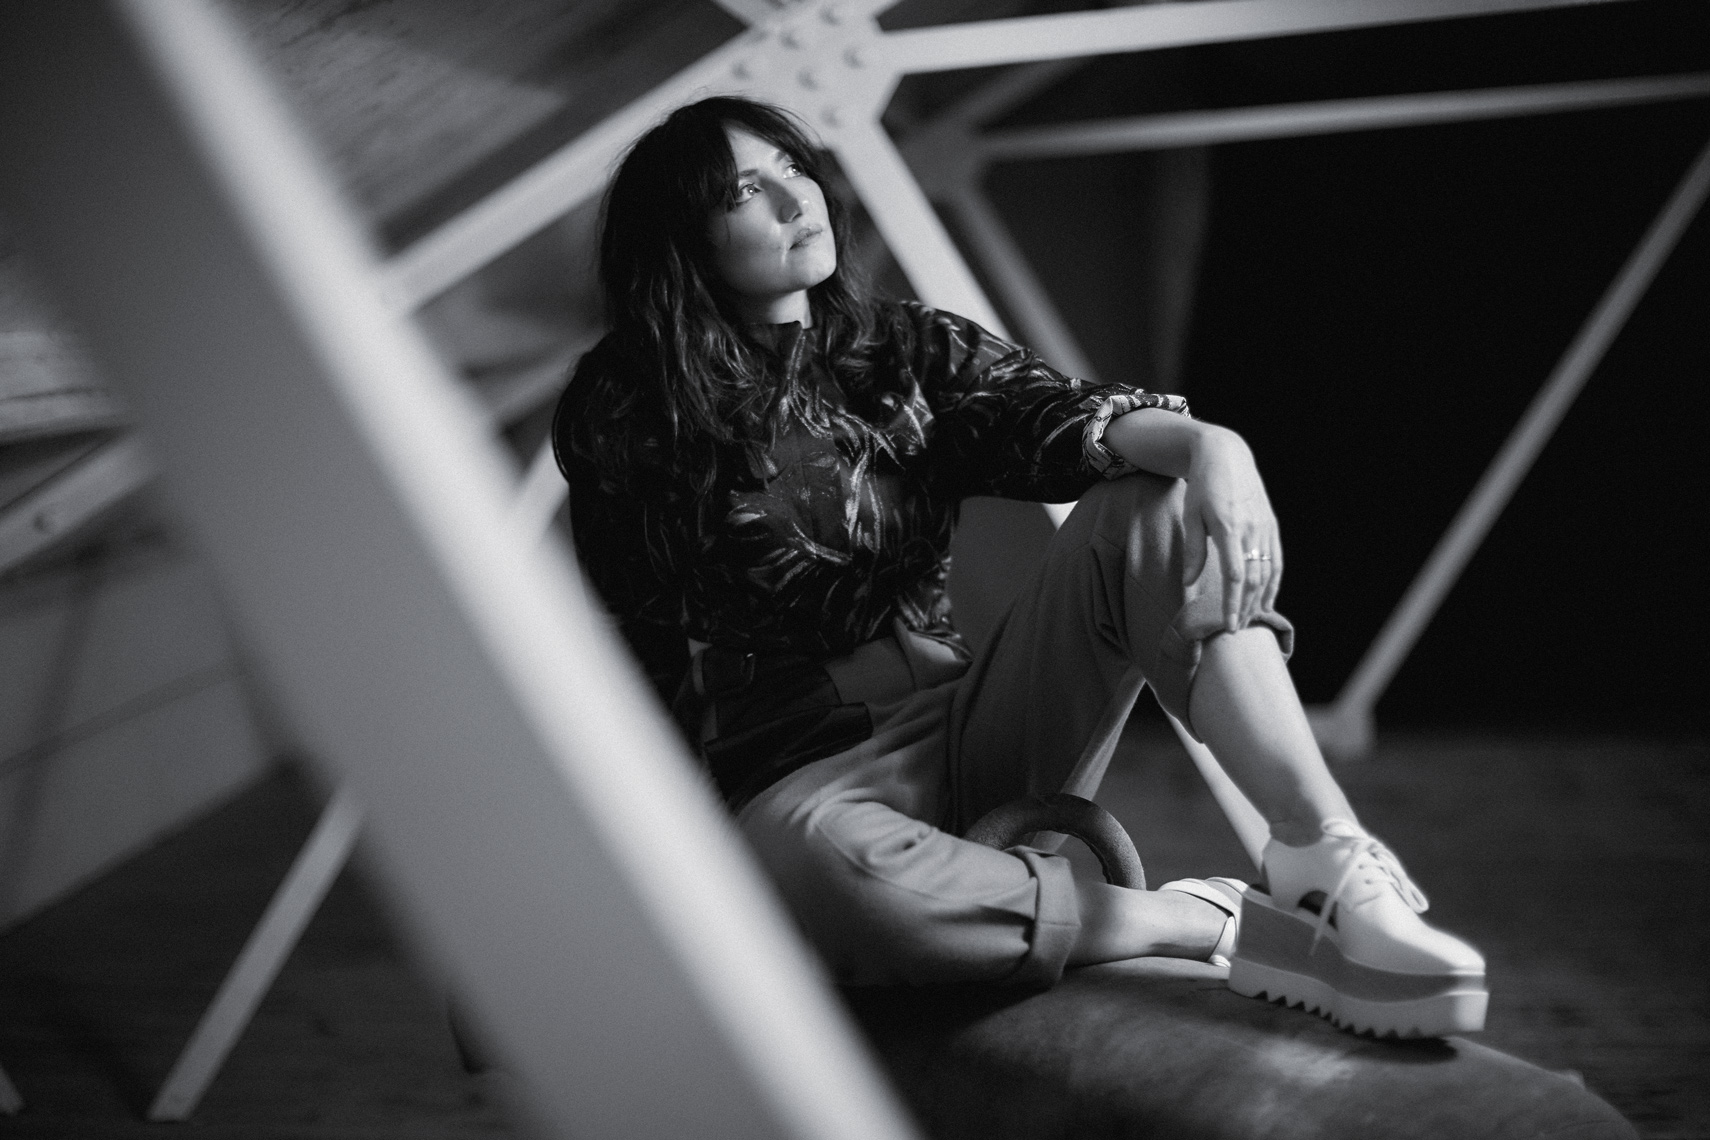 KT Tunstall photographed by Tom Oxley